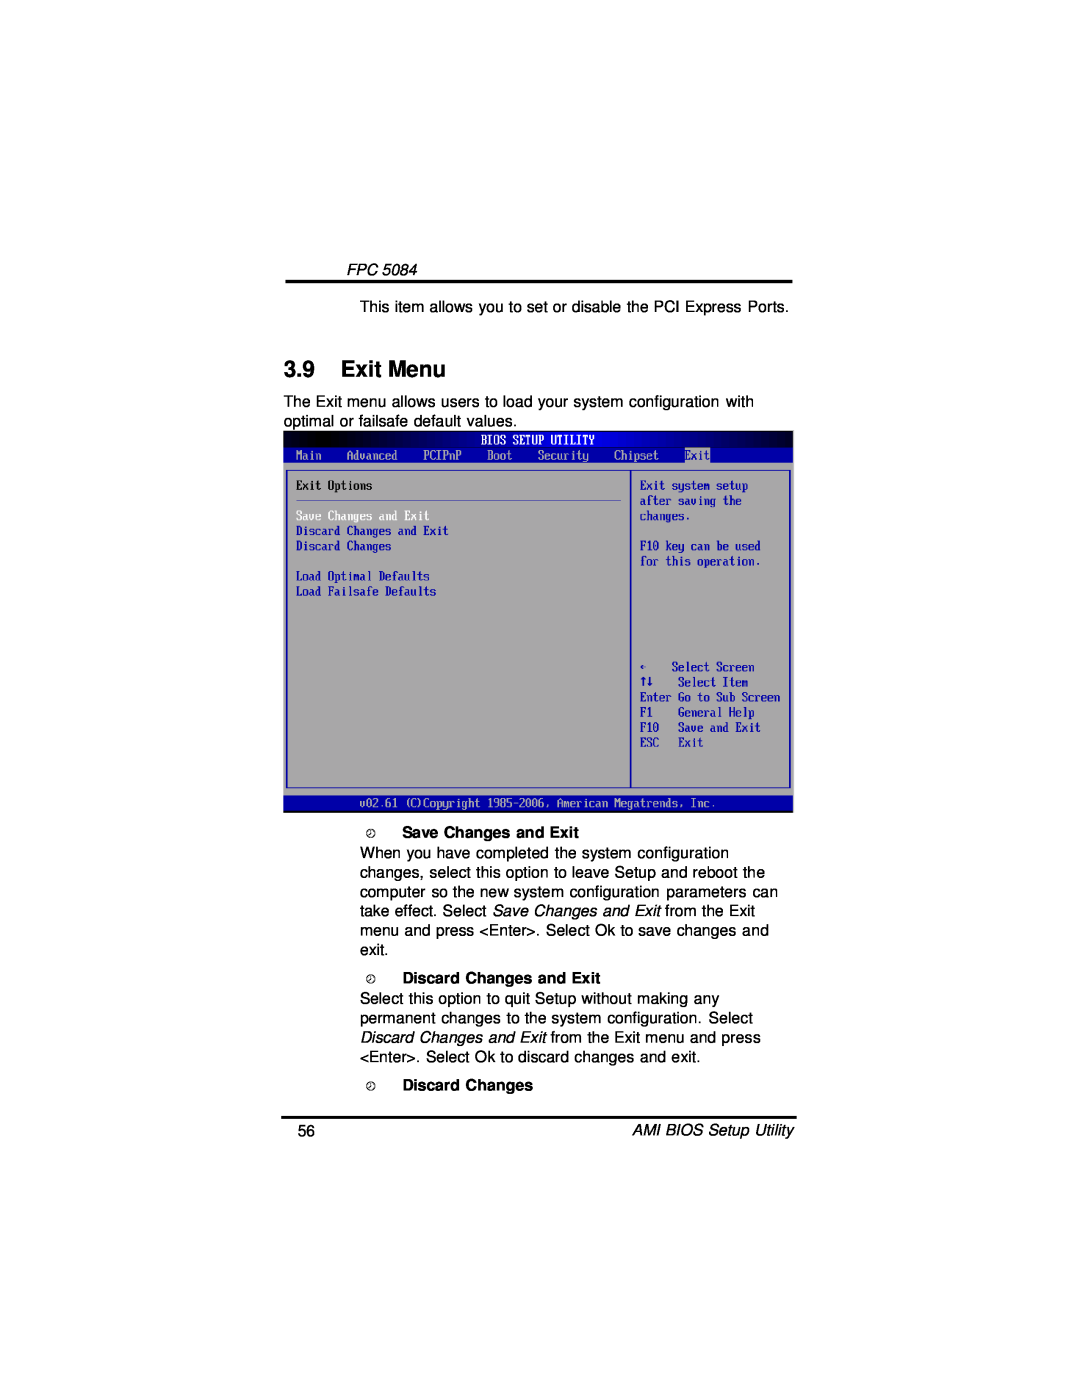 Intel FPC 5084, N270 user manual Exit Menu, Save Changes and Exit, Discard Changes and Exit 